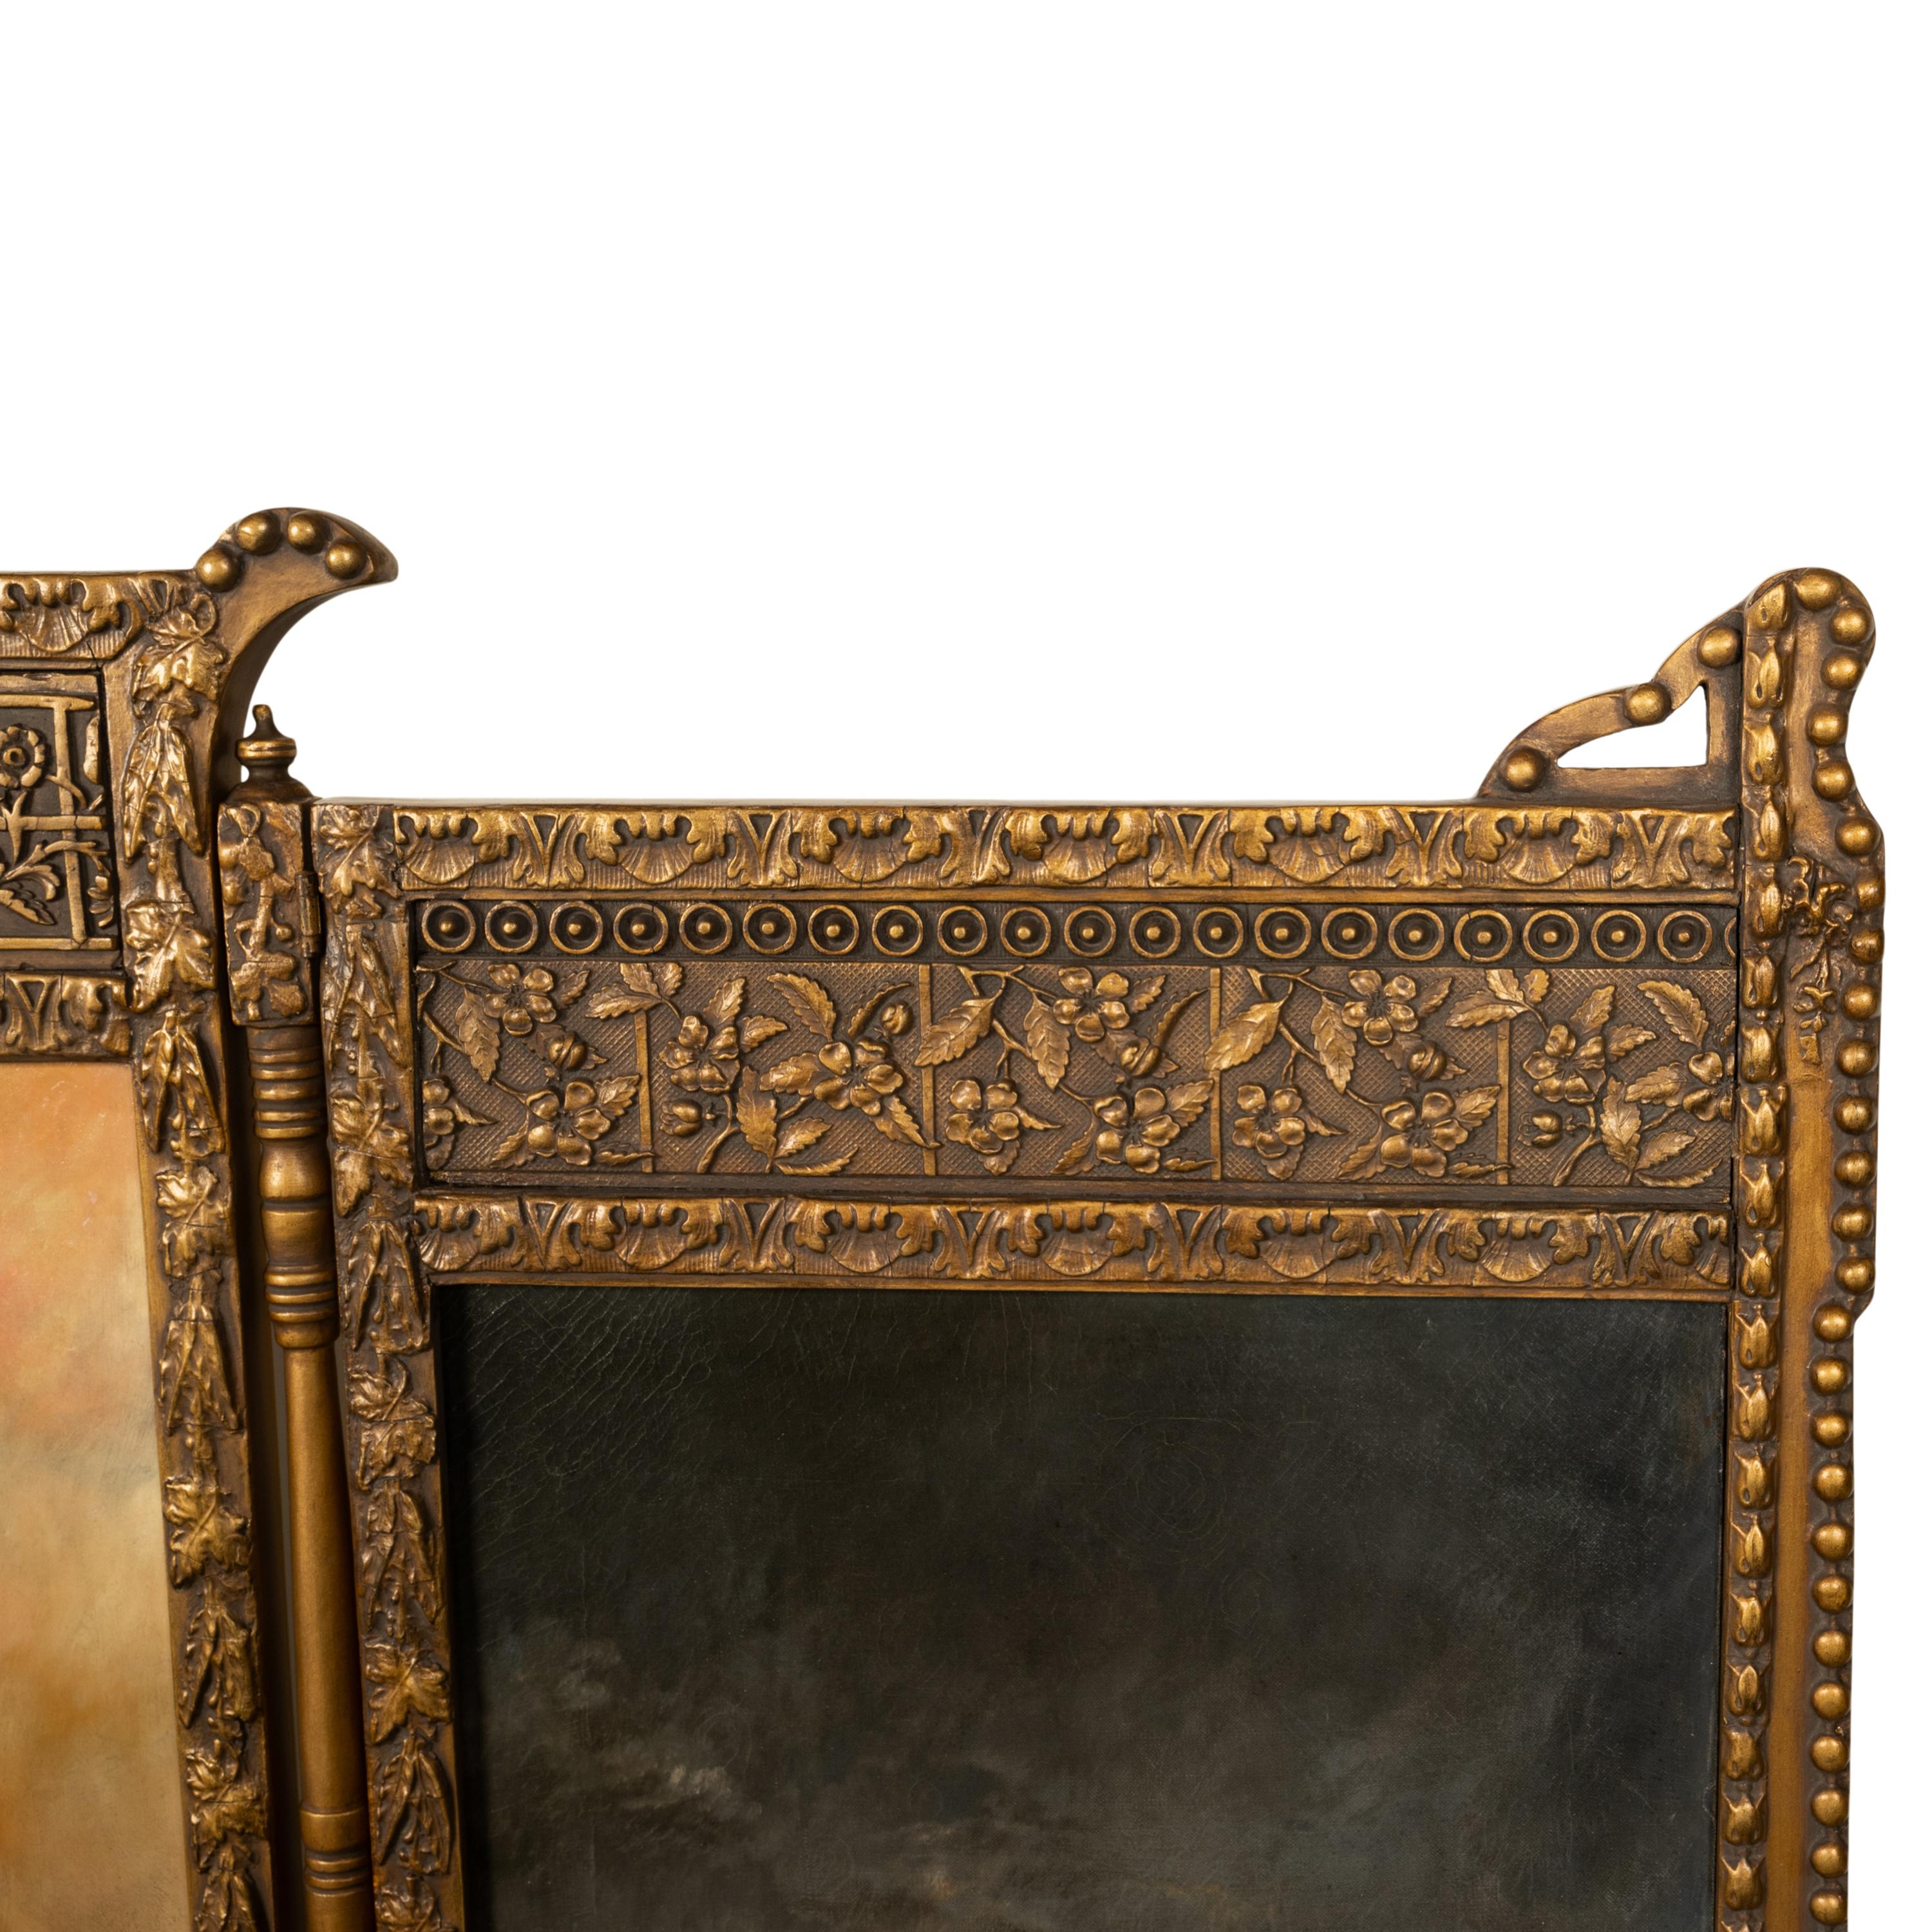  Antique Gilded Room Divider Screen Oil Painting Aesthetic Movement NY 1885 For Sale 3